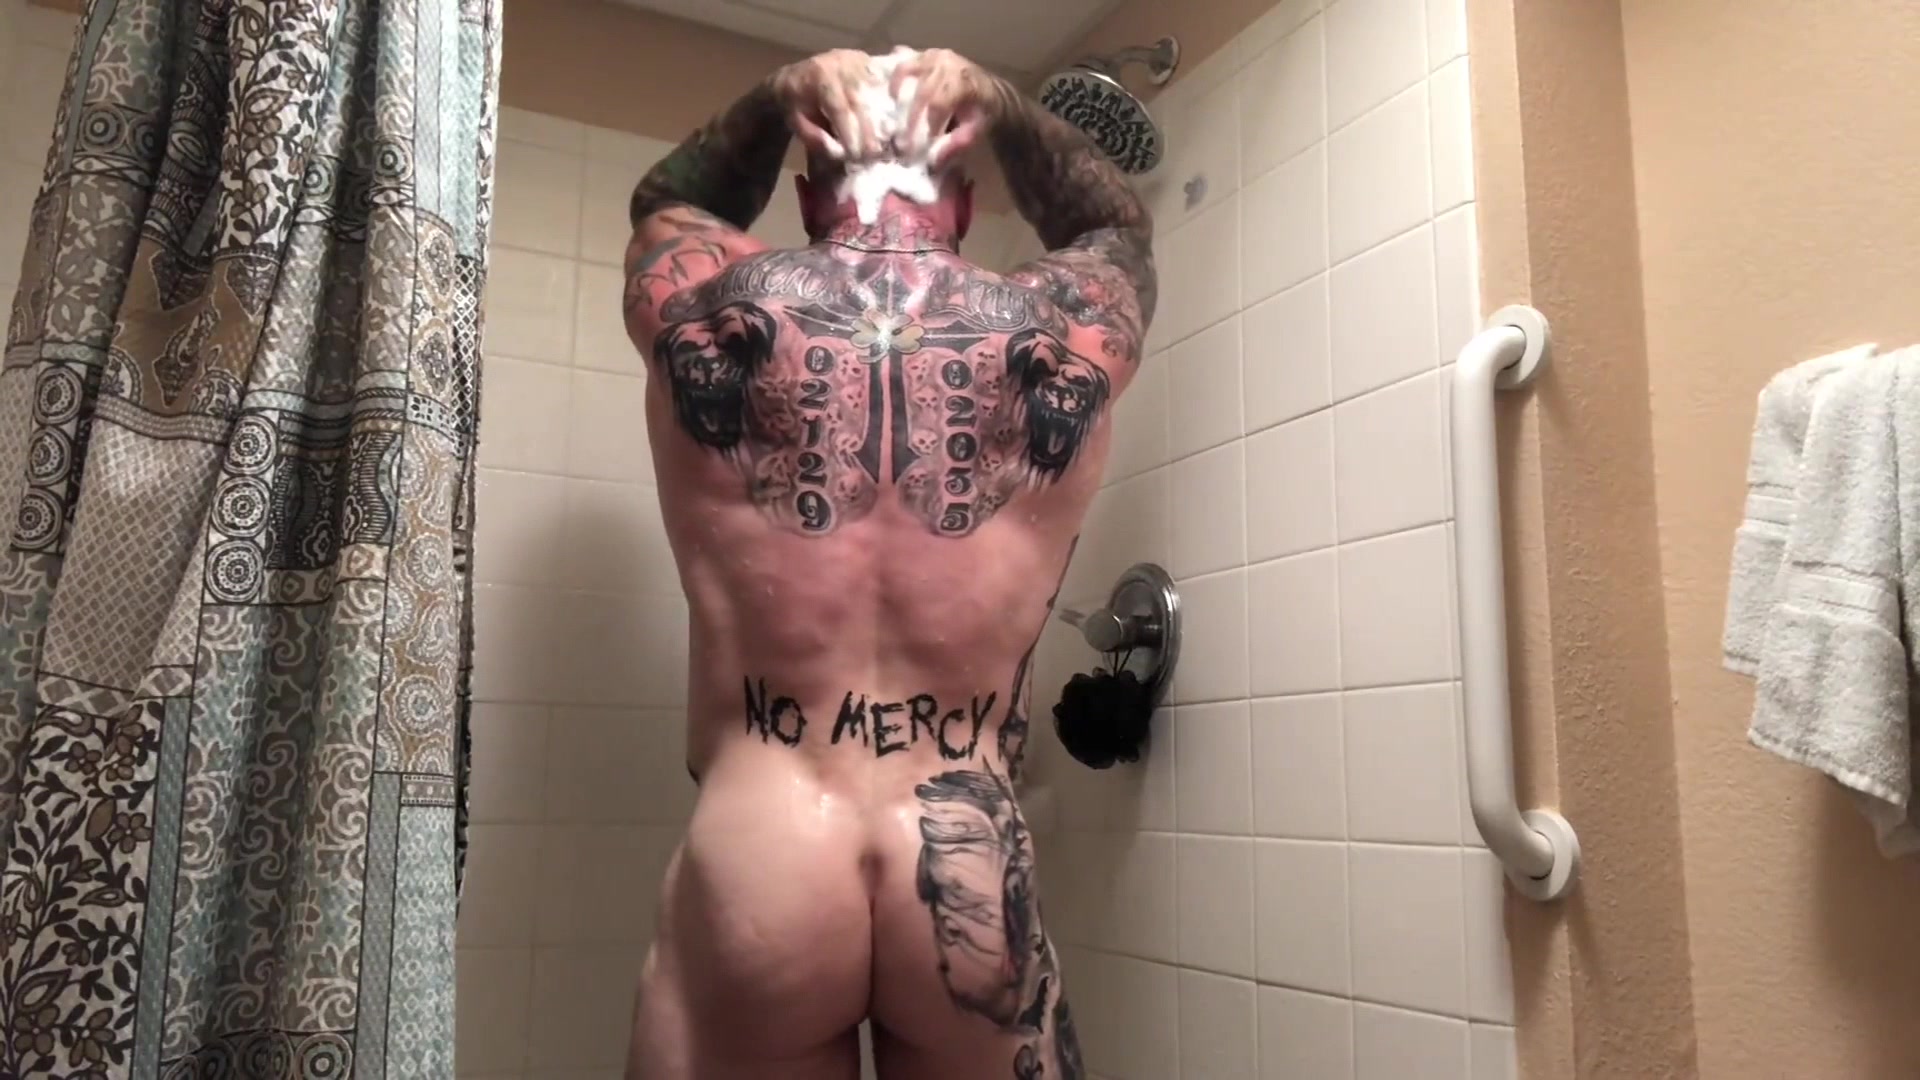 Hd Wallpapers 1920x1080 Cum Porn - Beefy tattooed muscle bodybuilder takes a shower and cum - ThisVid.com